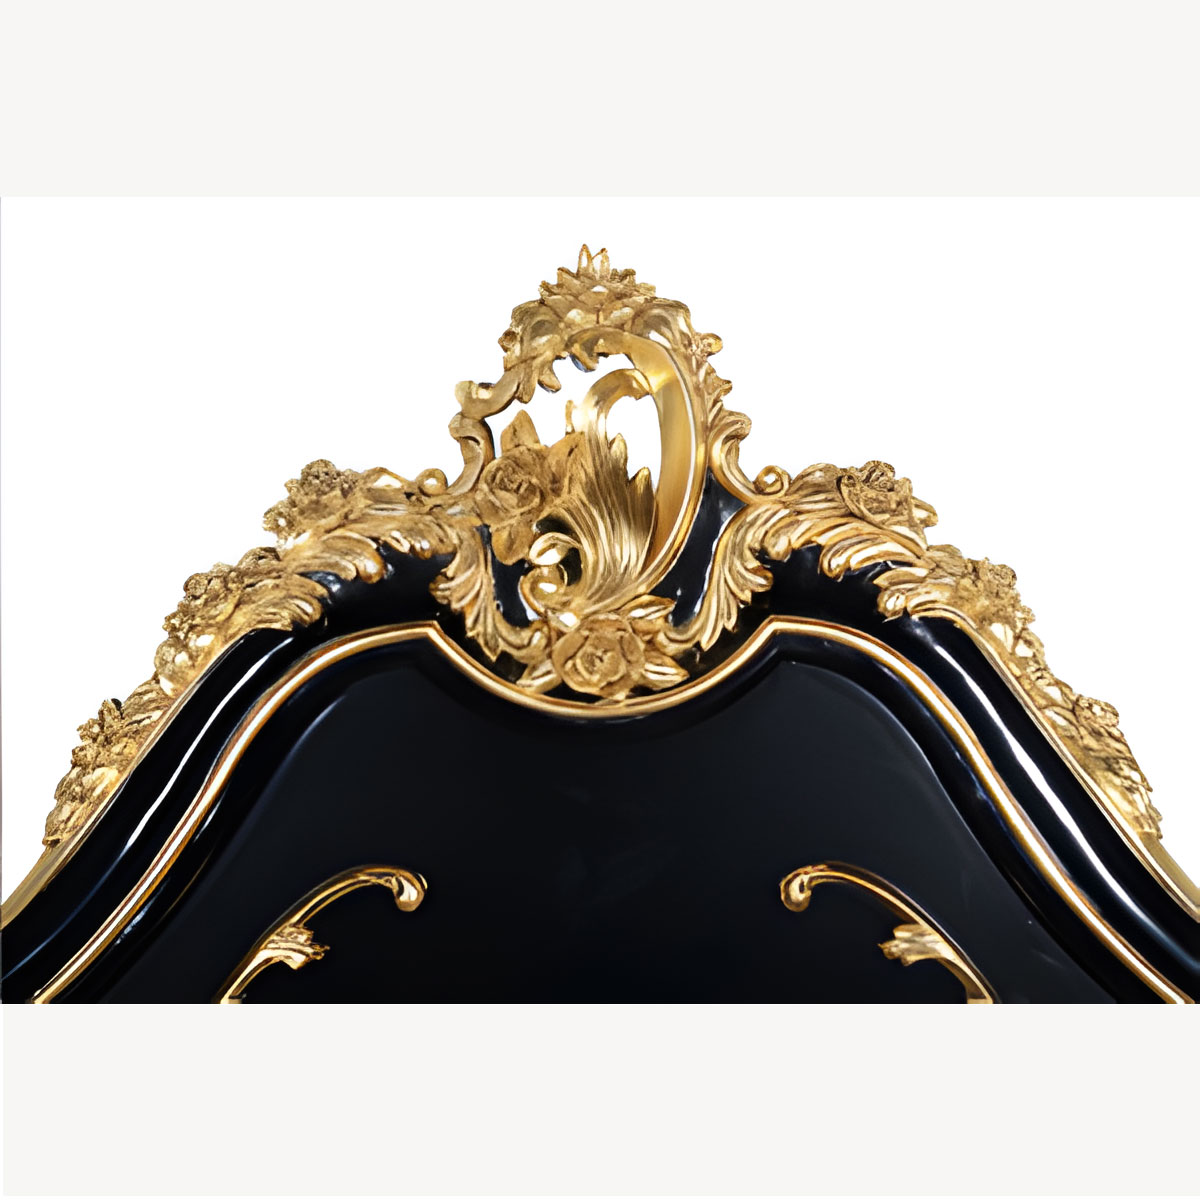 Versailles Ornate Bed In Black With Gold Detailing 2 - Hampshire Barn Interiors - Versailles Ornate Bed In Black With Gold Detailing -